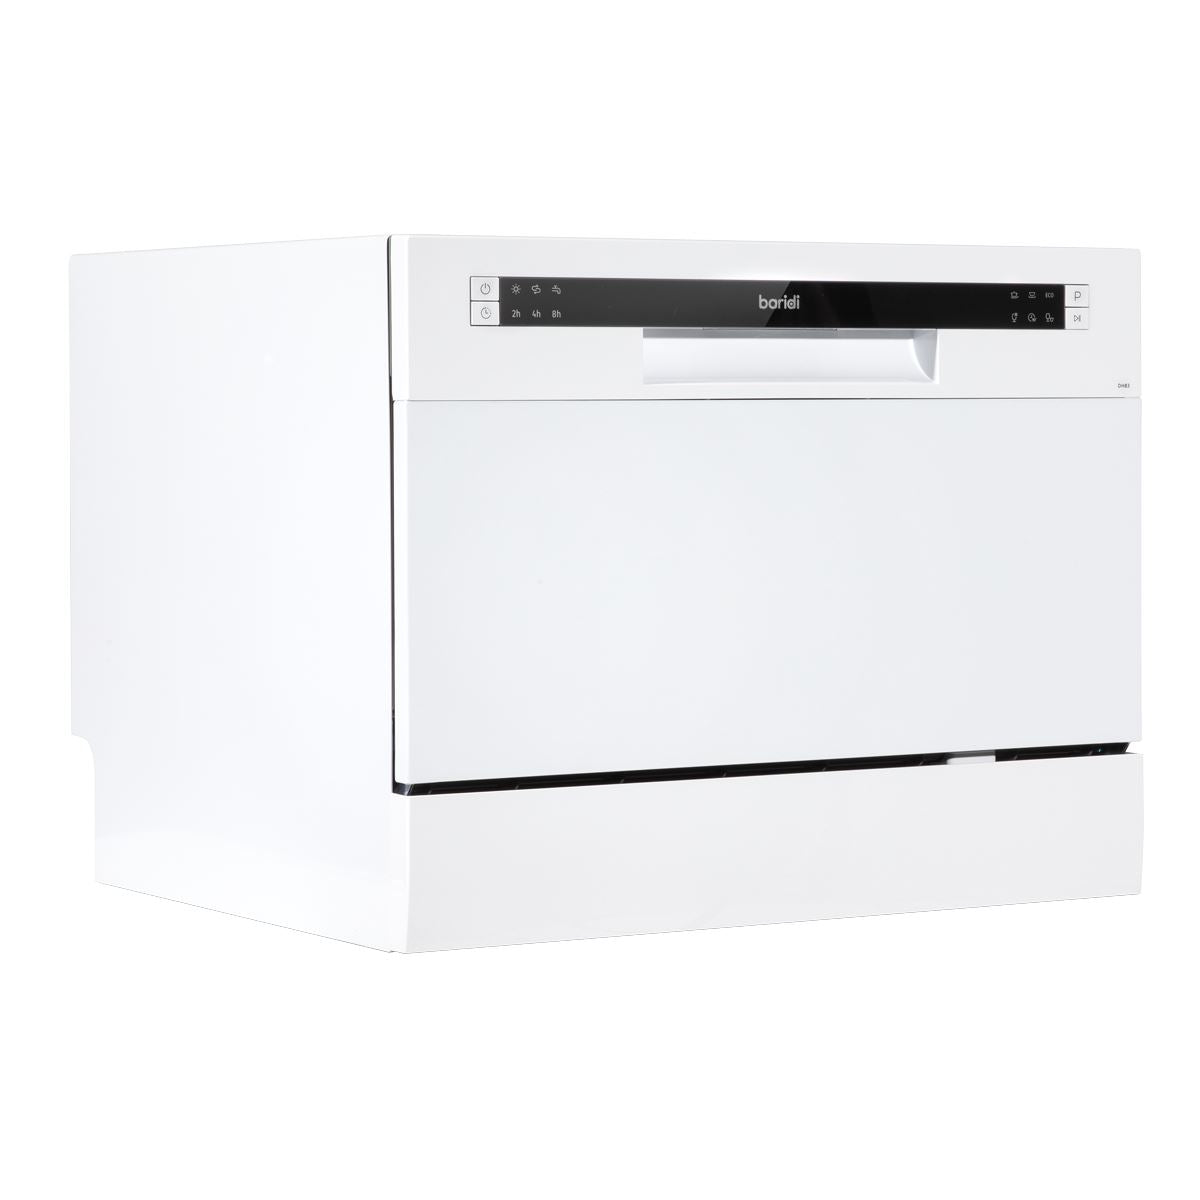 Baridi Compact Tabletop Dishwasher 6 Place Settings, 6 Programmes, Low Noise, 6.5L Cycle, Start Delay - White